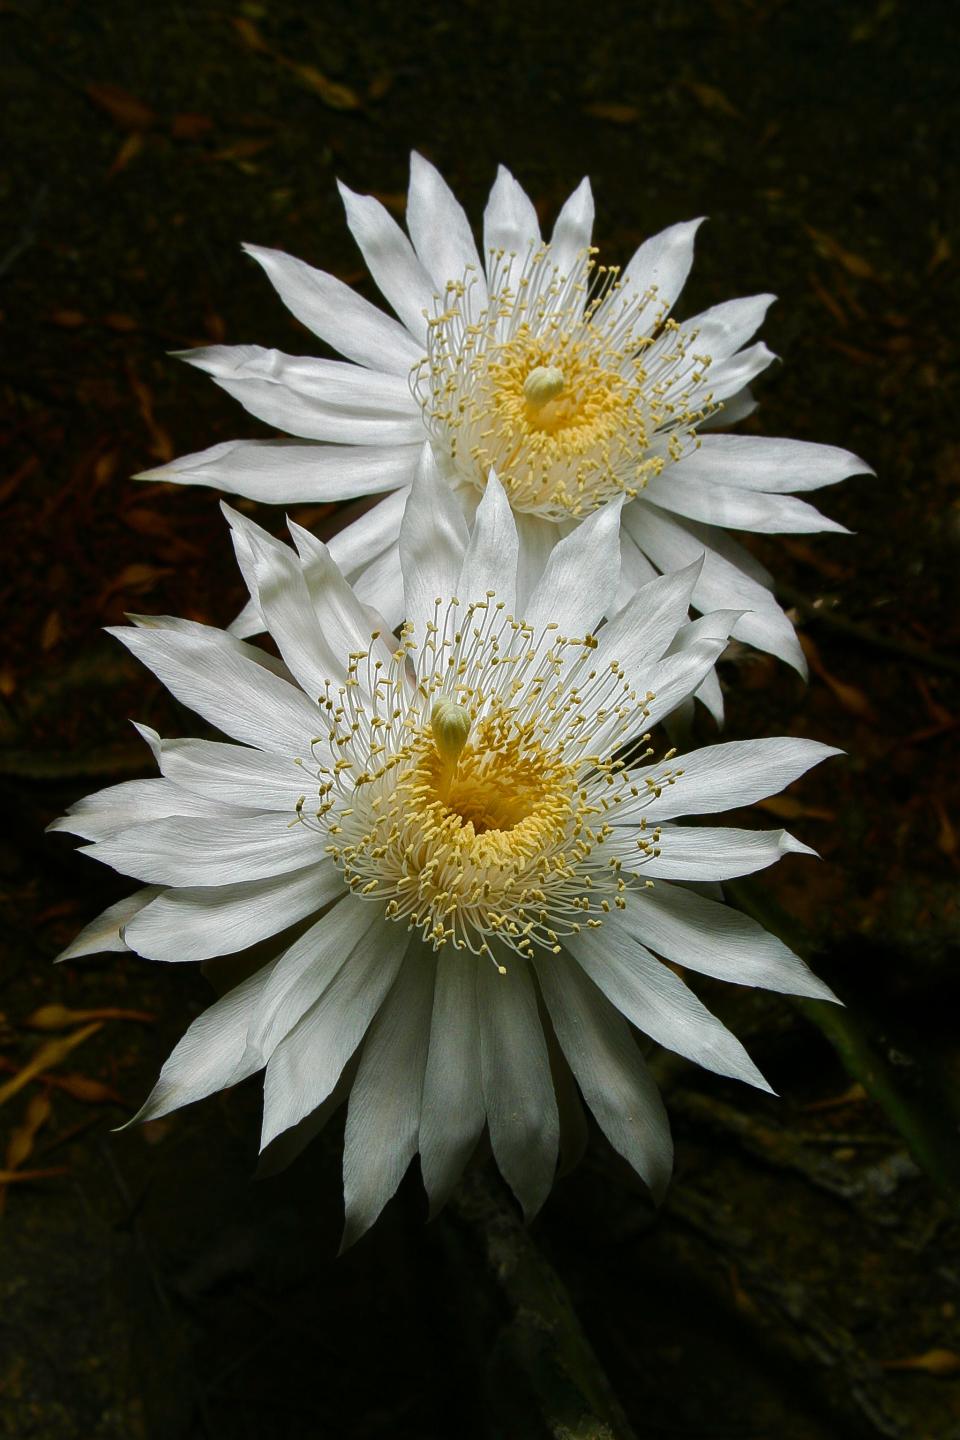 Queen of the Night, the flower of a mysterious Sonoran cactus, blooms for a single night each summer.